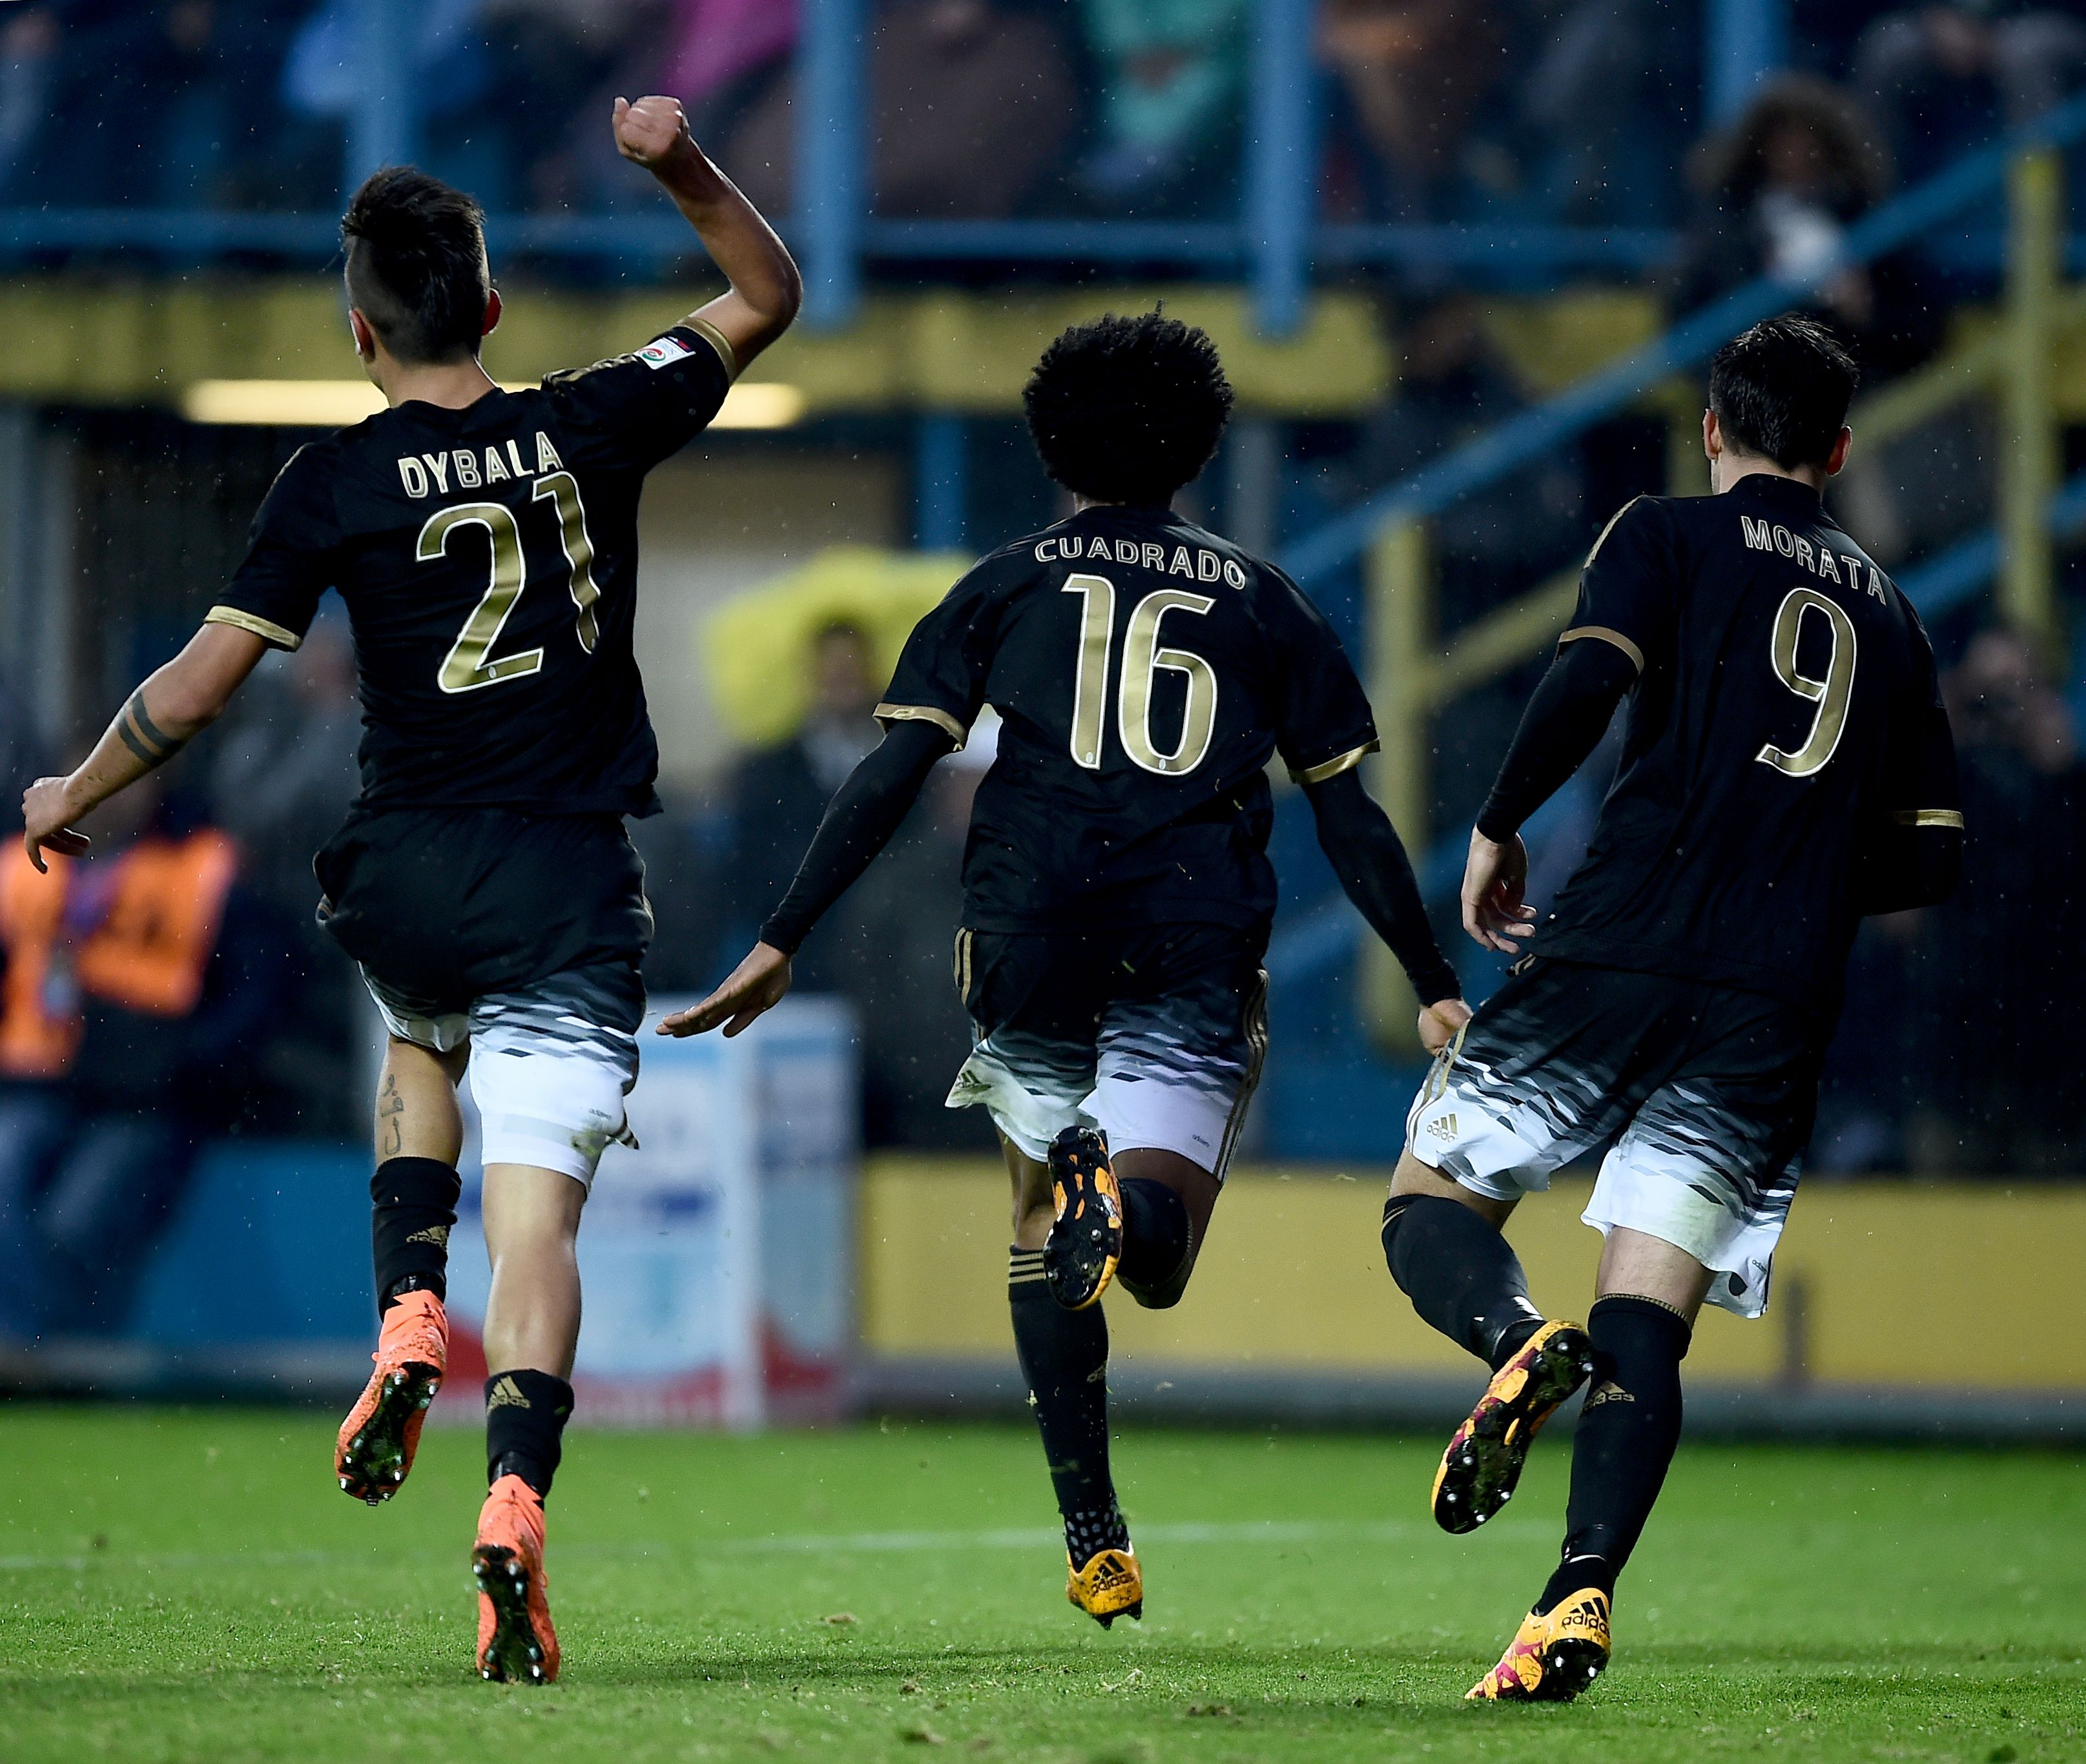 Juventus' forward from Colombia Juan Cuadrado (C) celebrates with teammates Juventus' forward from Argentina Paulo Dybala (L) and Juventus' forward from Spain Alvaro Morata  after scoring during the Italian Serie A football match Frosinone vs Juventus on February 7, 2016 in Frosinone. / AFP / FILIPPO MONTEFORTE        (Photo credit should read FILIPPO MONTEFORTE/AFP/Getty Images)